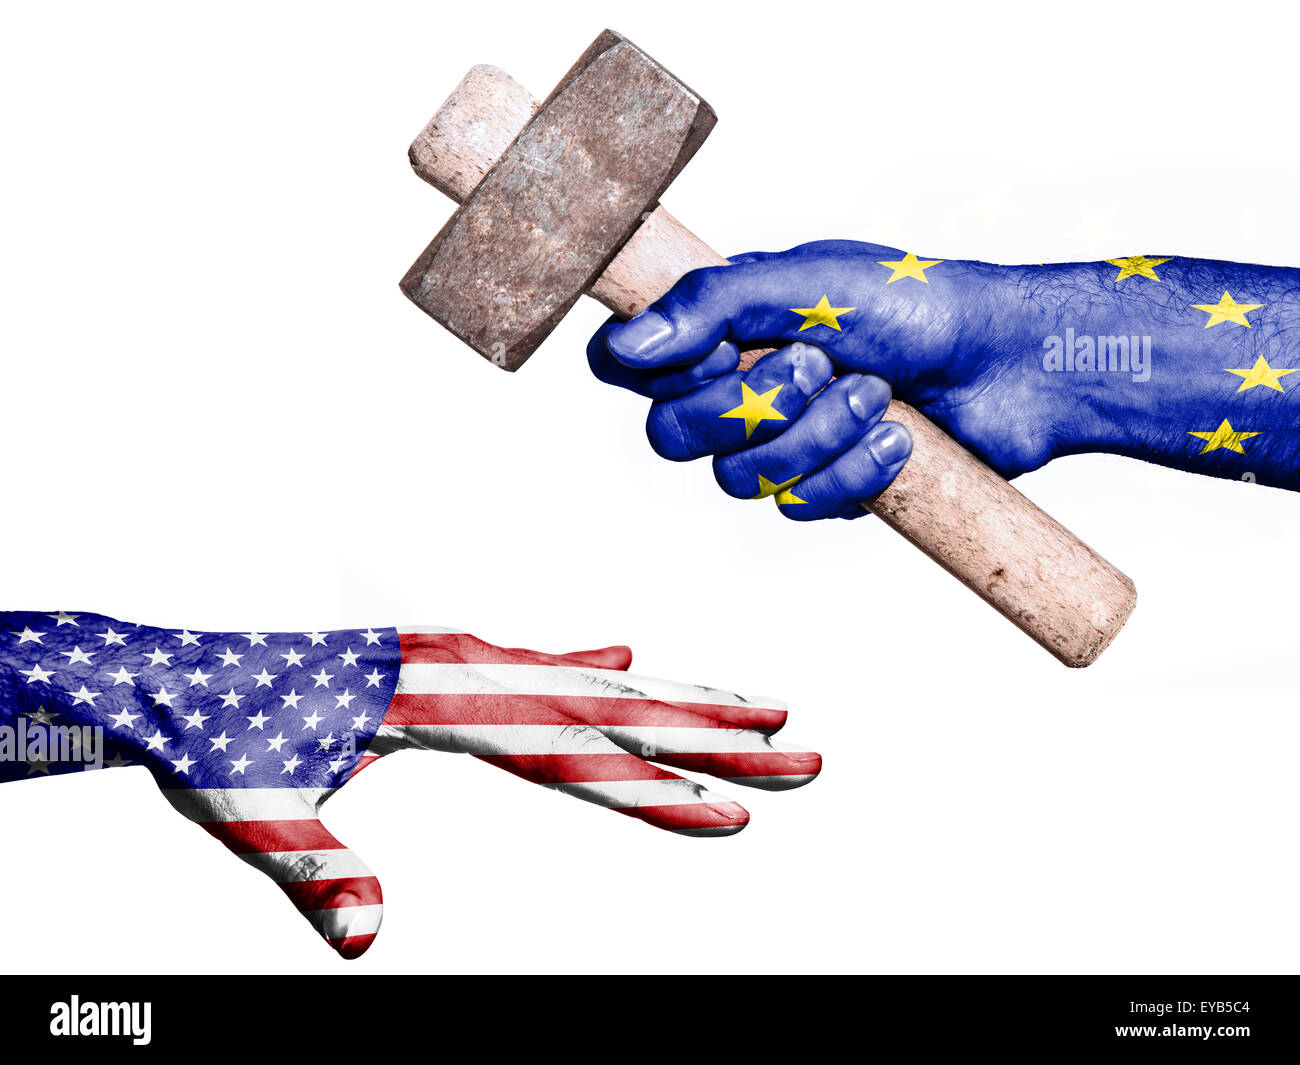 Flag of European Union overprinted on a hand holding a heavy hammer hitting a hand representing the United States. Conceptual im Stock Photo